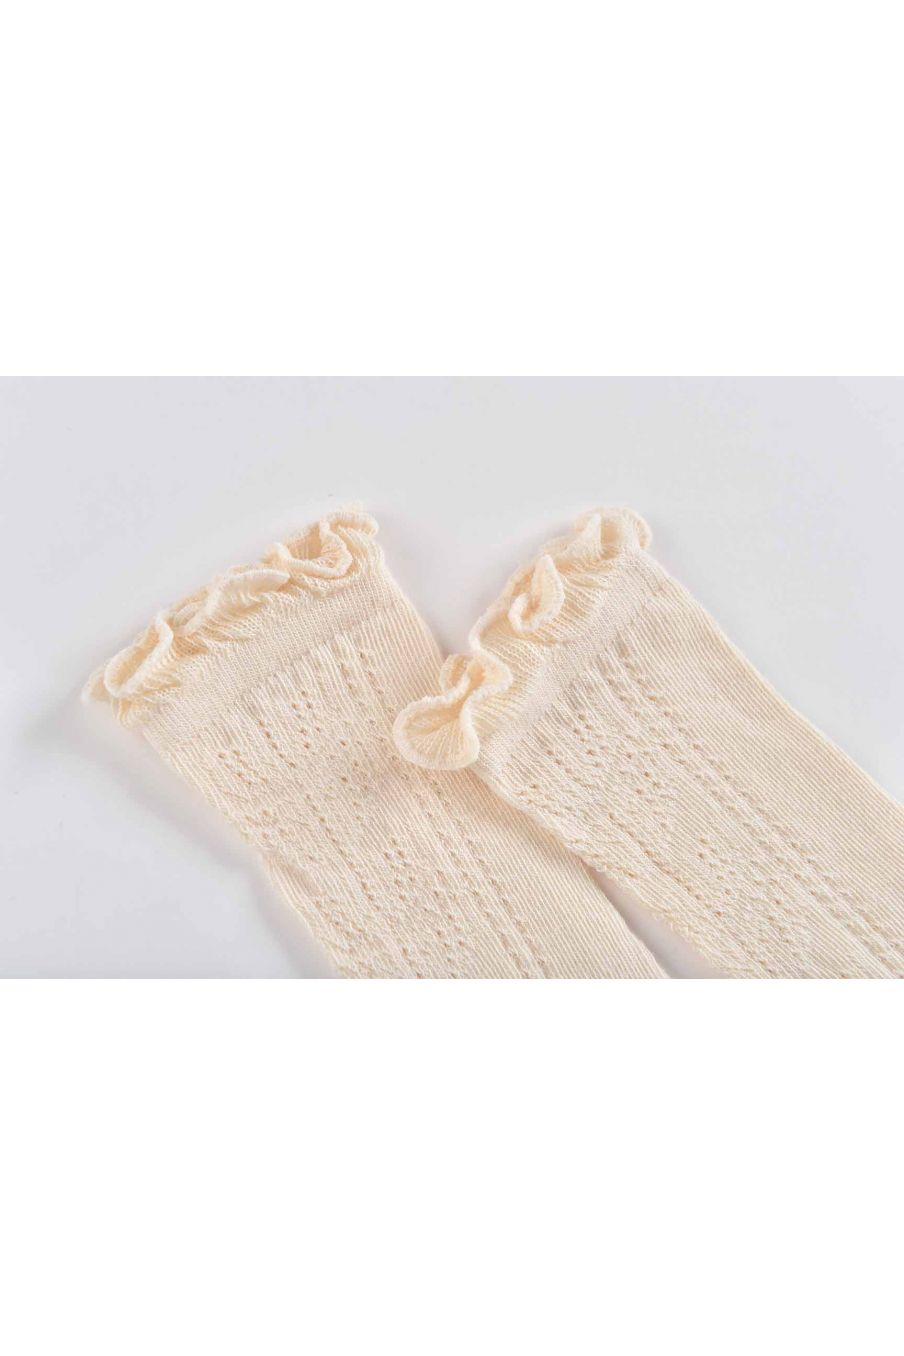 bebe-fille-chaussettes-carie-cream